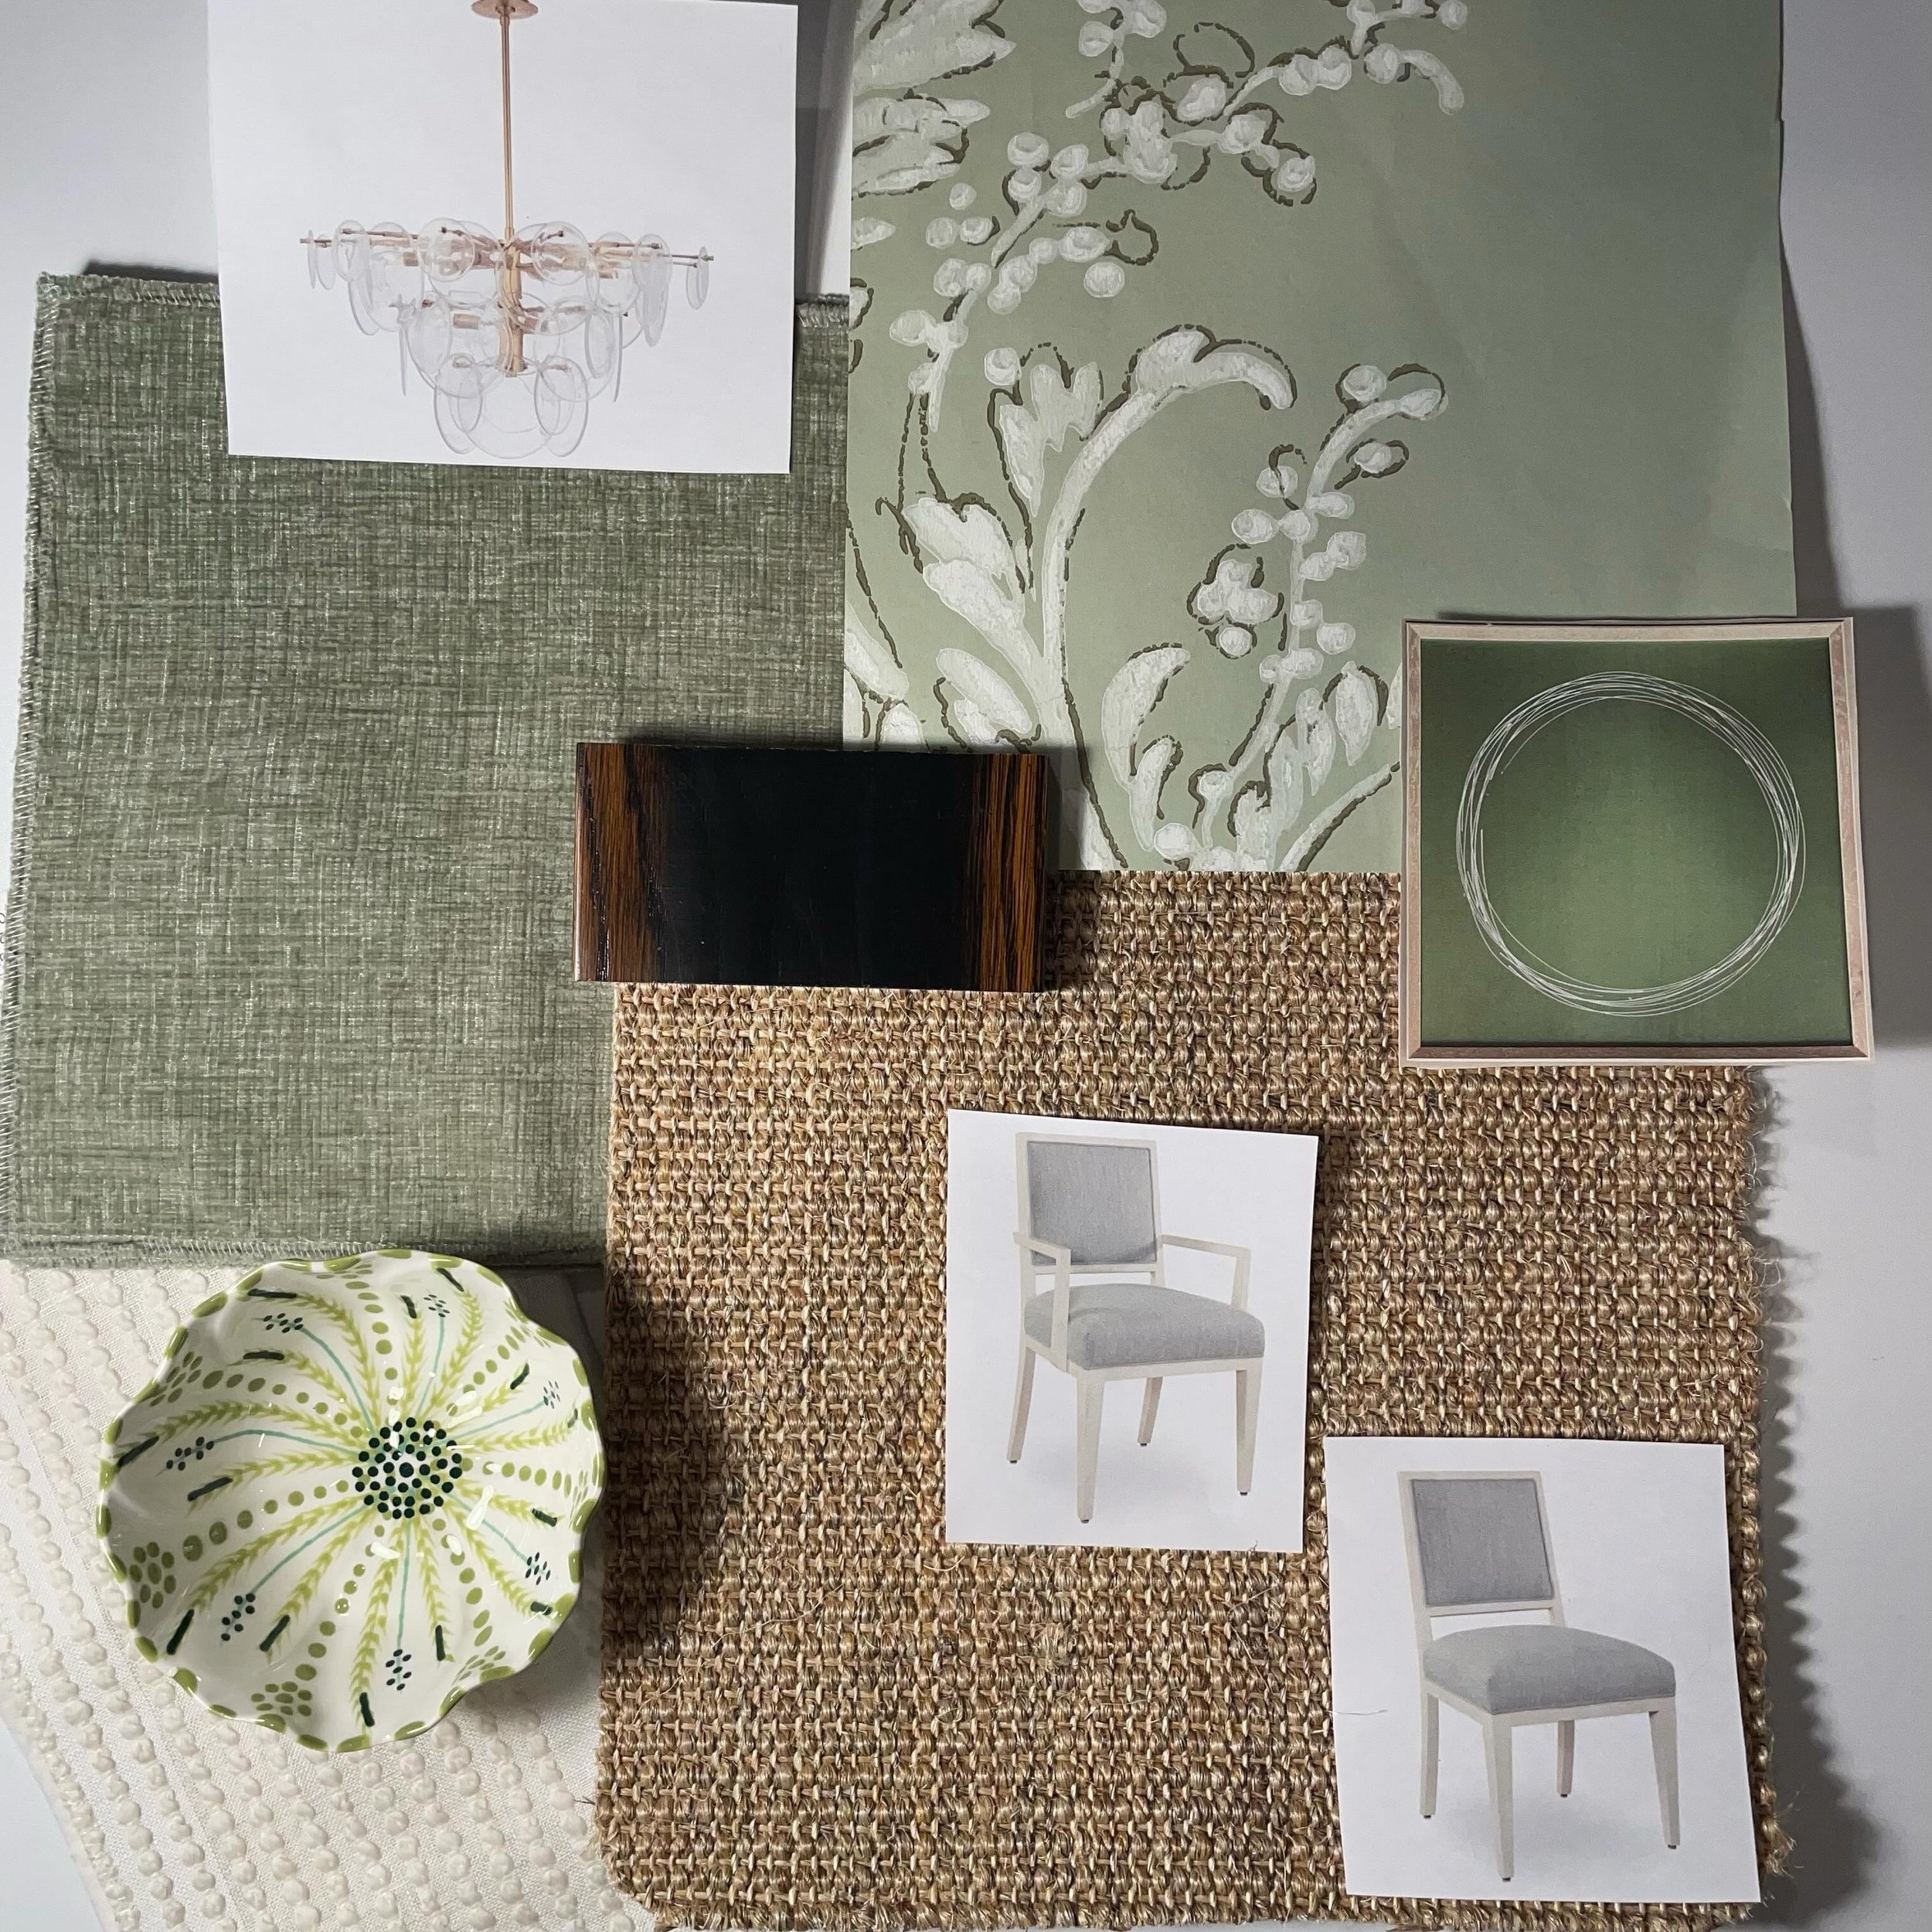 Happy #FlatLayFriday with these Summit dining room selections. I call it &ldquo;traditional with a twist&rdquo;! Photos of the finished room coming soon. 

#flatlay #interiors #interiordesign #summitnj #njinteriors #njdesigner #materials